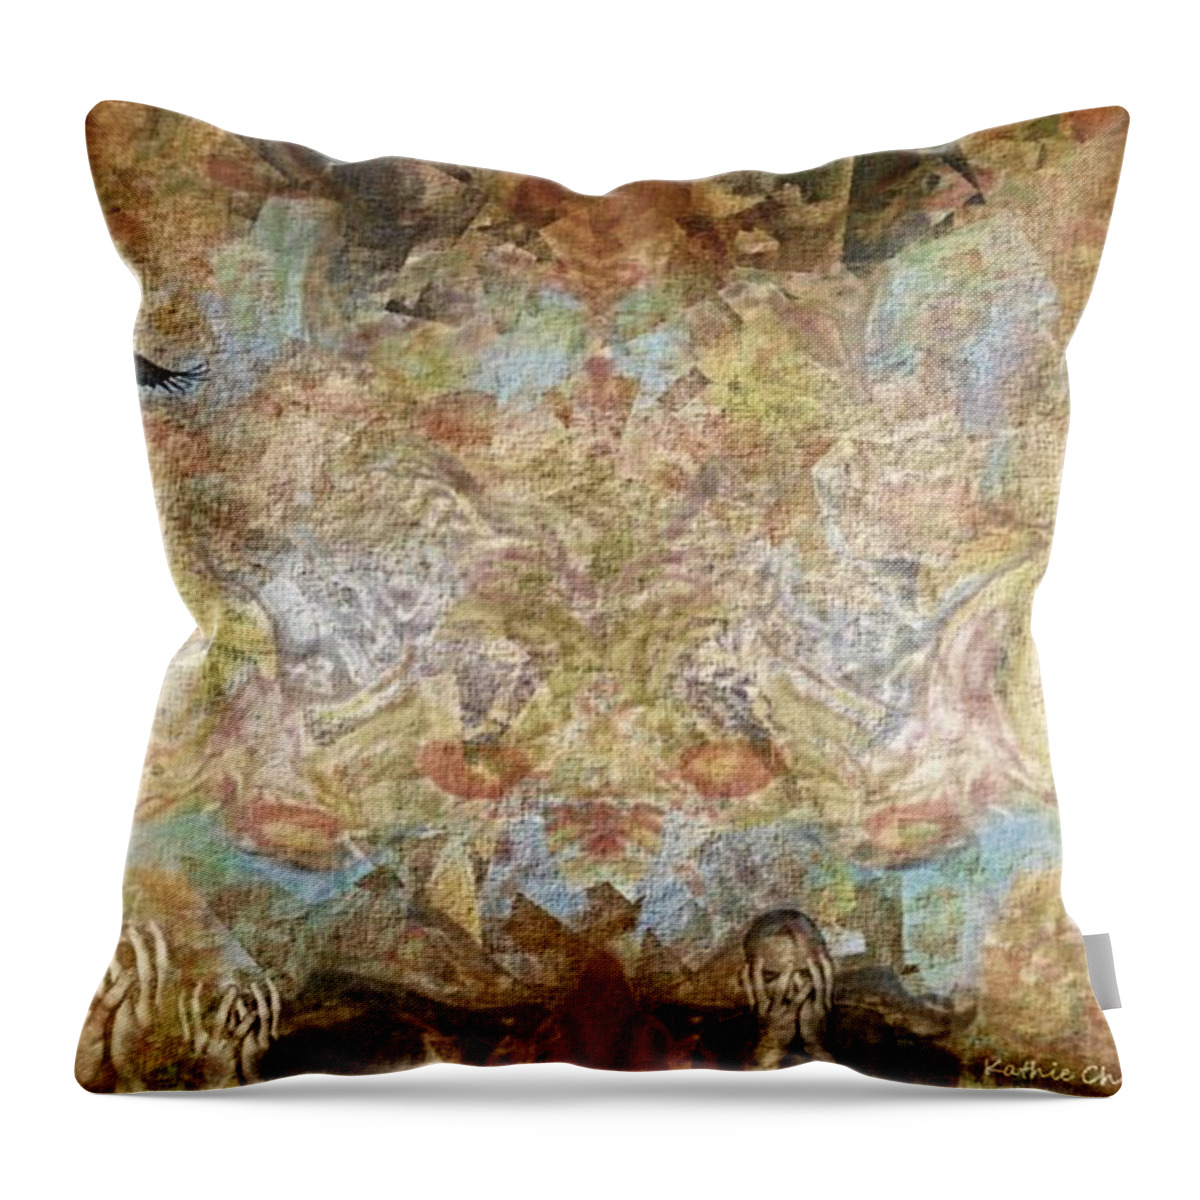 Surreal Throw Pillow featuring the digital art Chaos by Kathie Chicoine